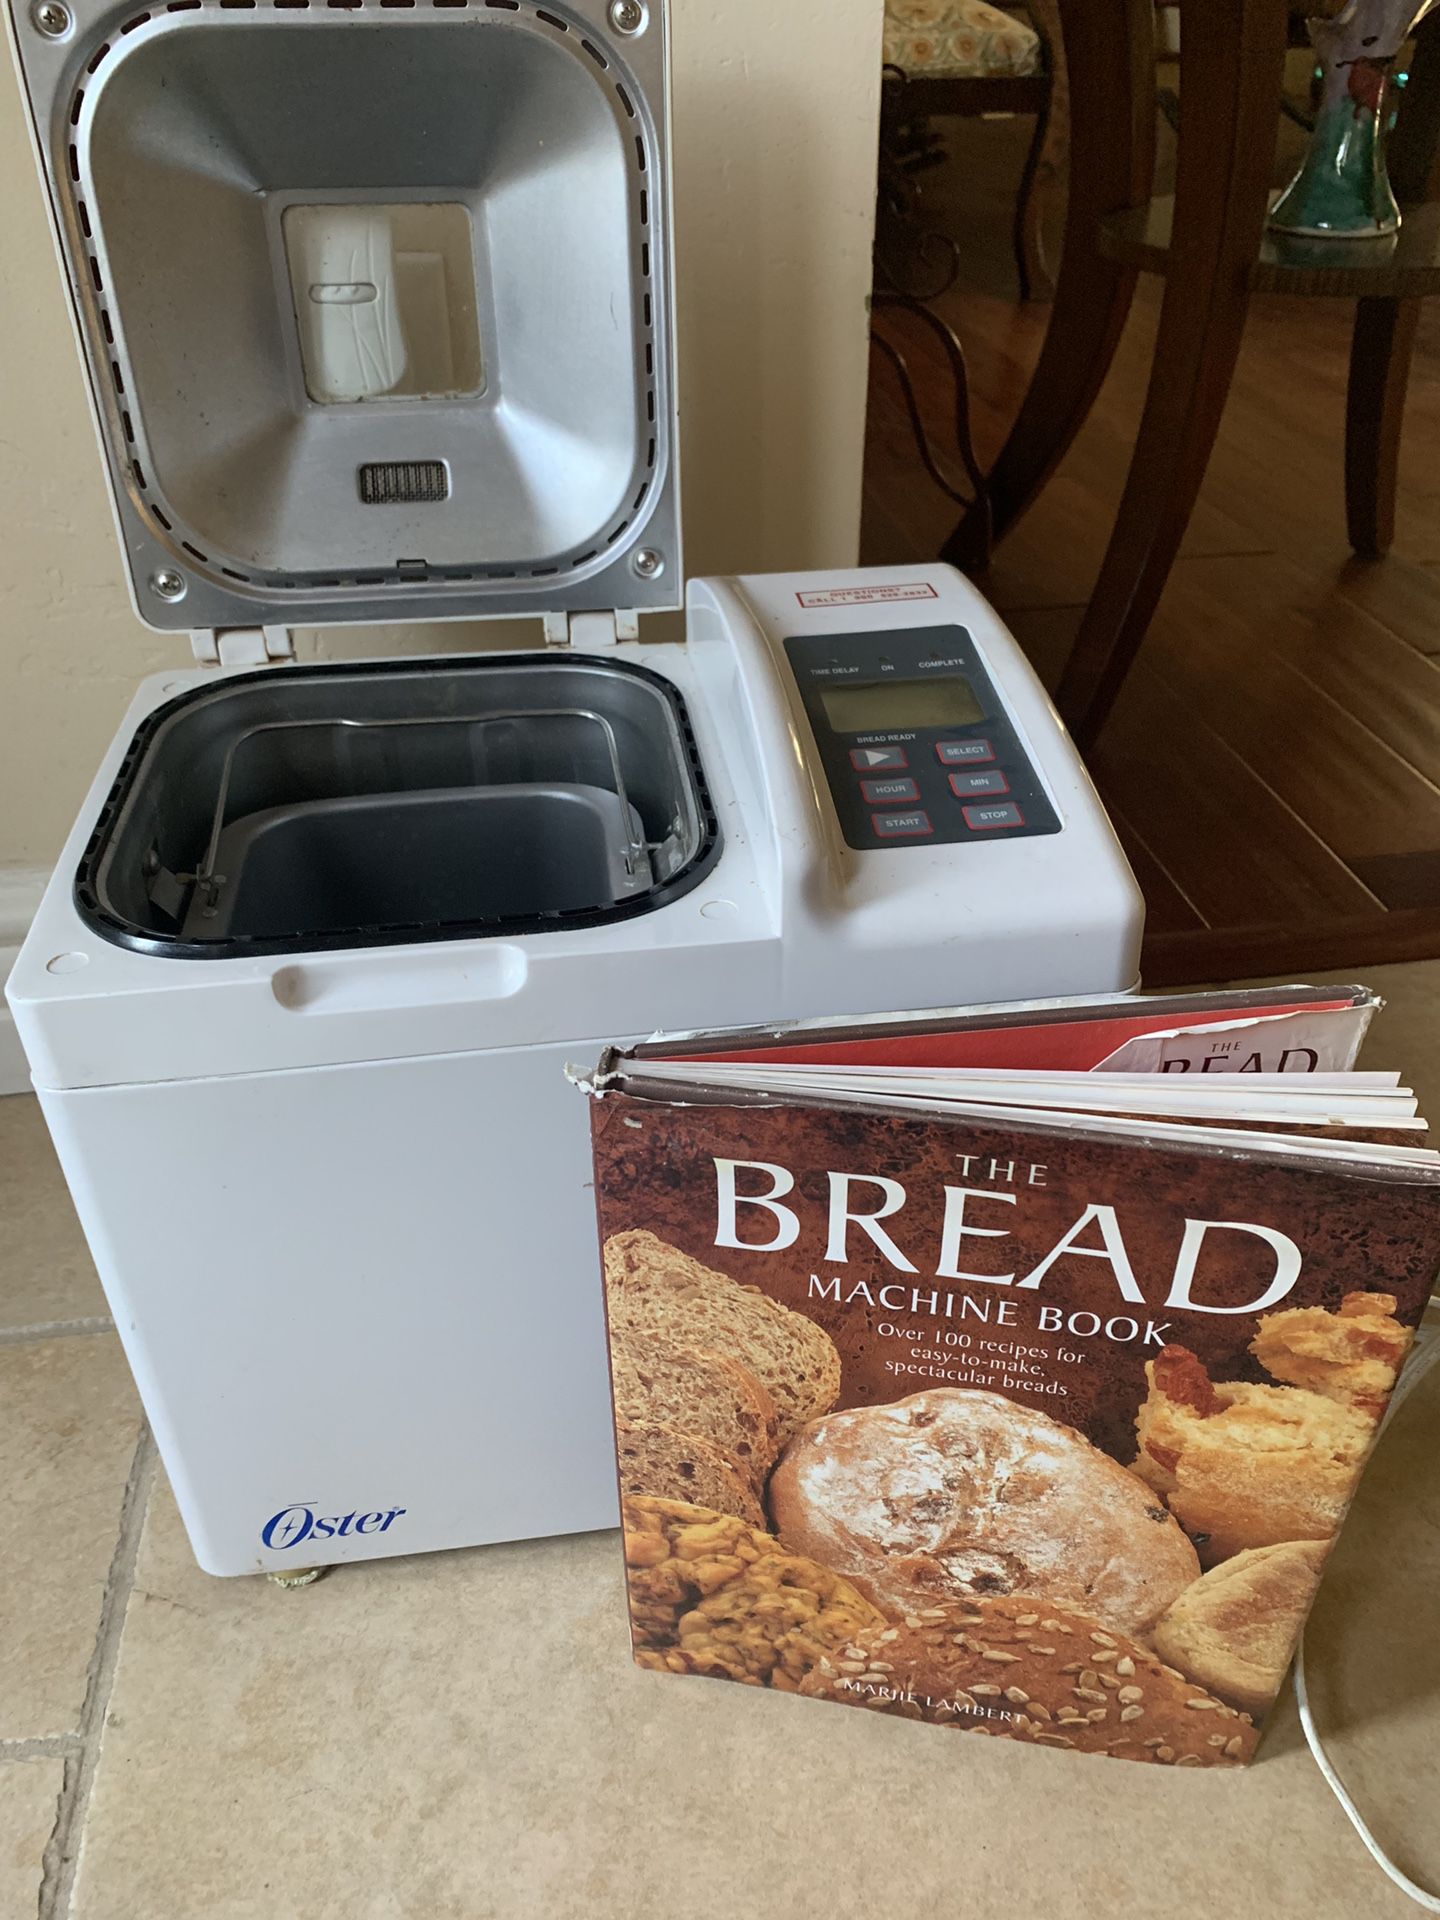 Bread machine by Oster